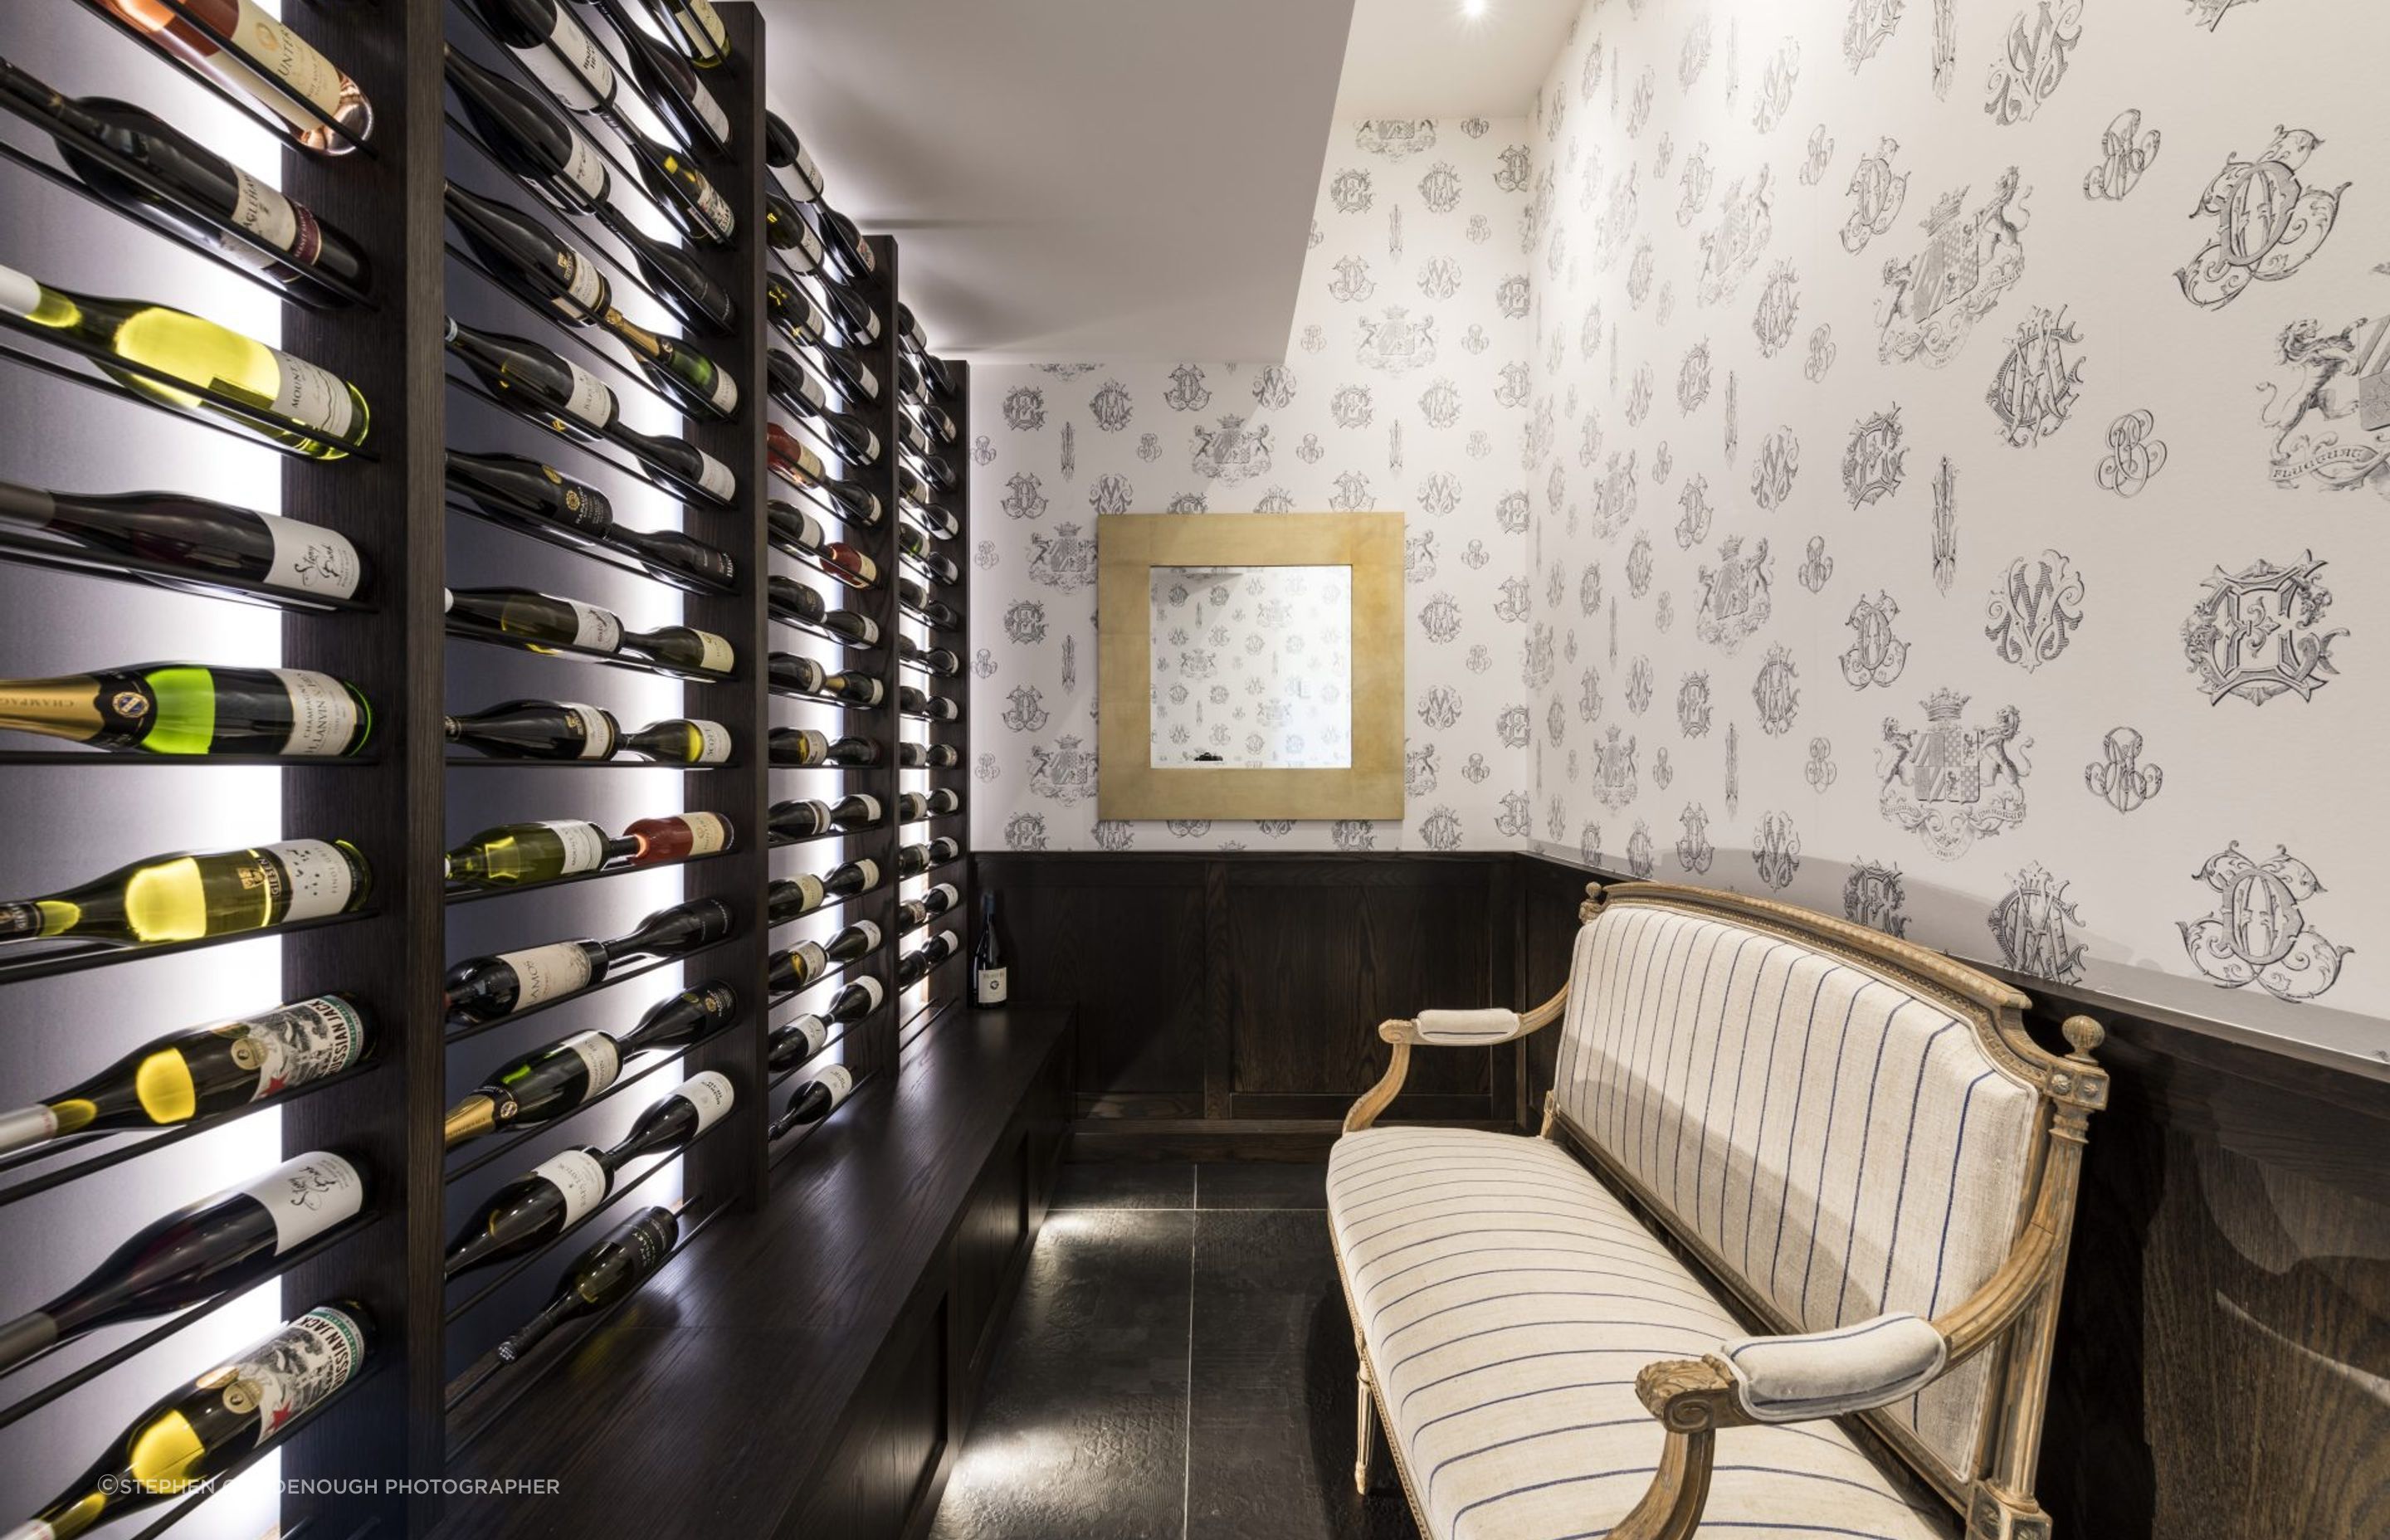 The wine cellar. Photography: Stephen Goodenough.